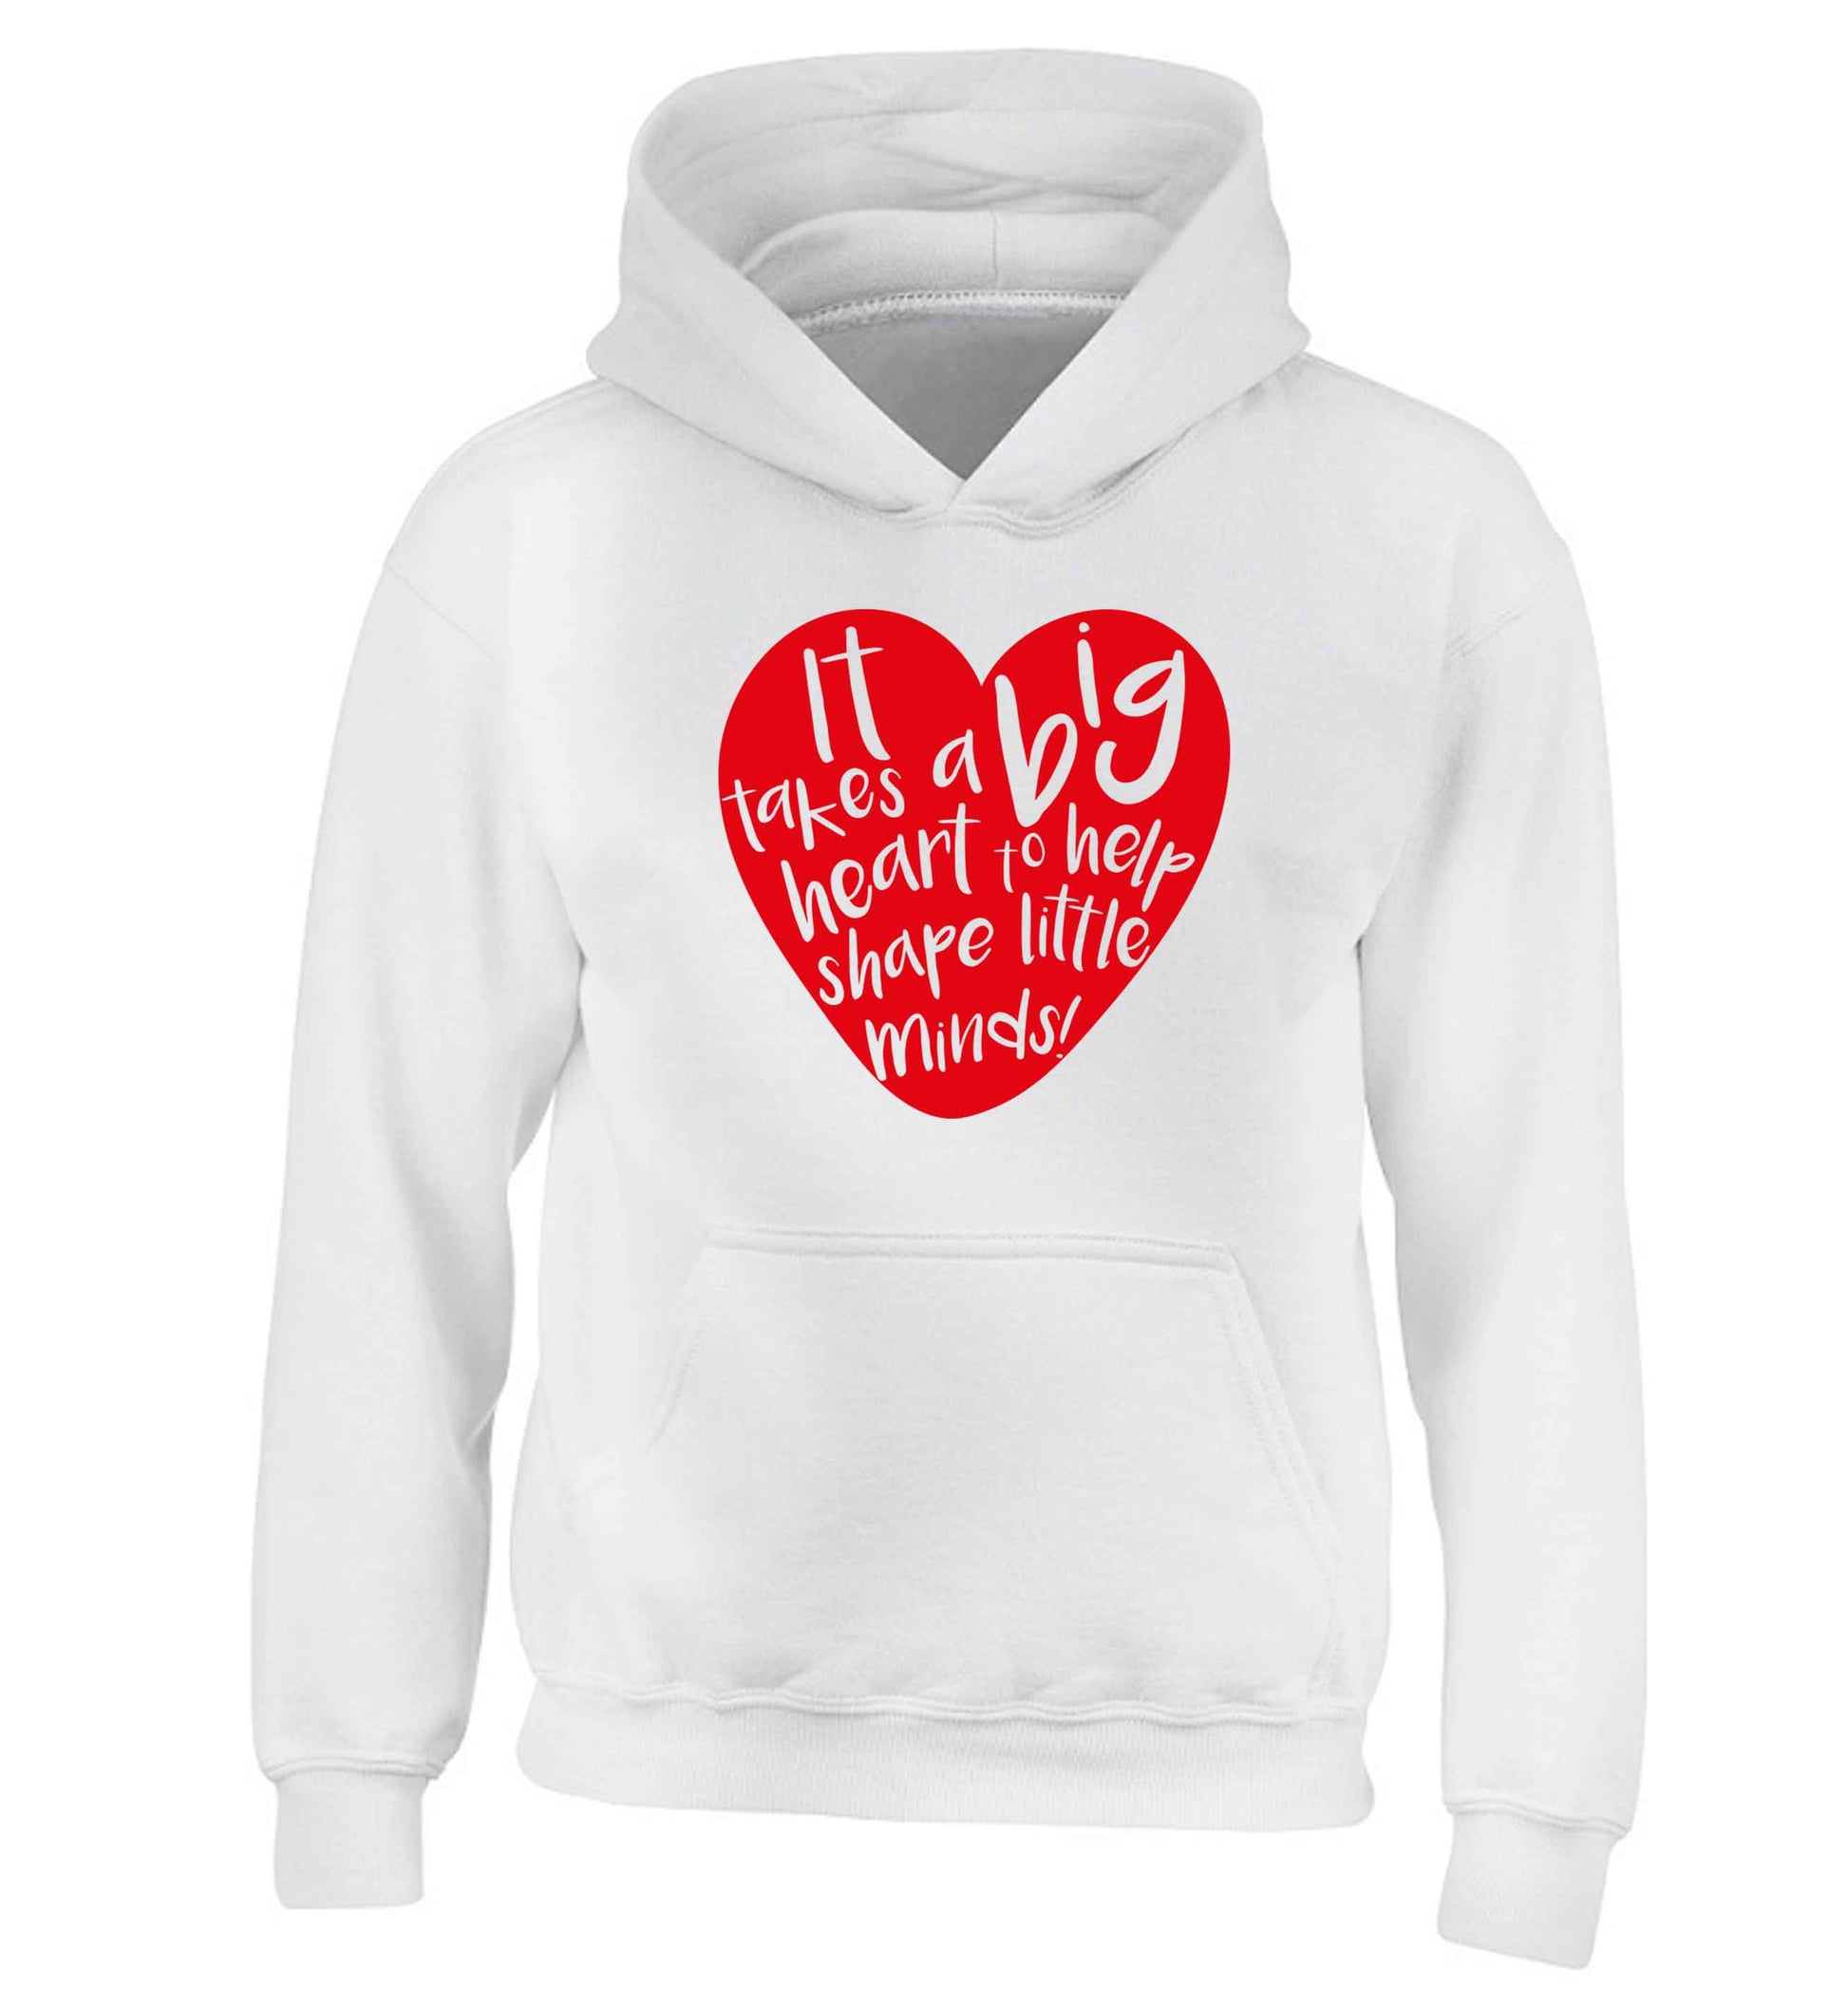 It takes a big heart to help shape little minds children's white hoodie 12-13 Years